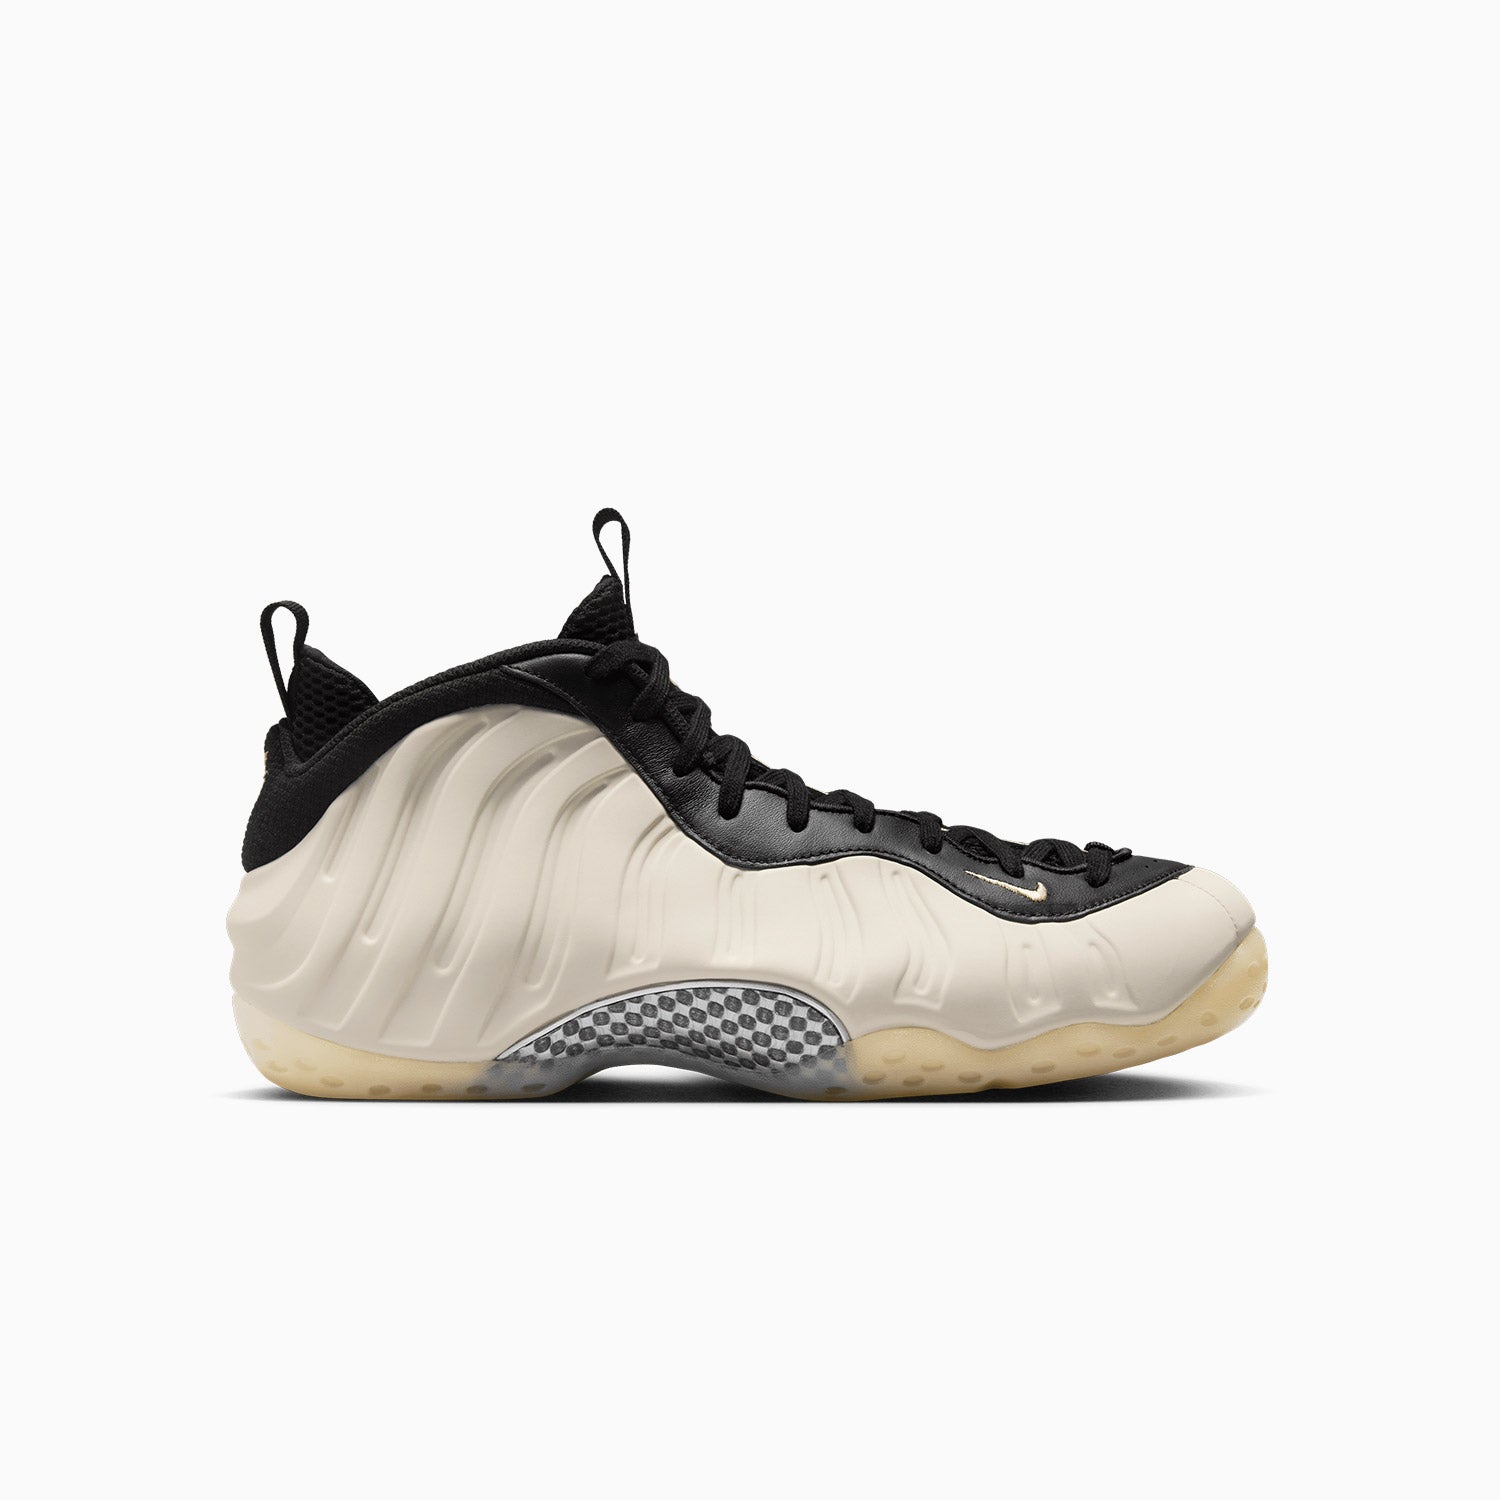 nike-mens-air-foamposite-one-light-orewood-brown-shoes-fd5855-002